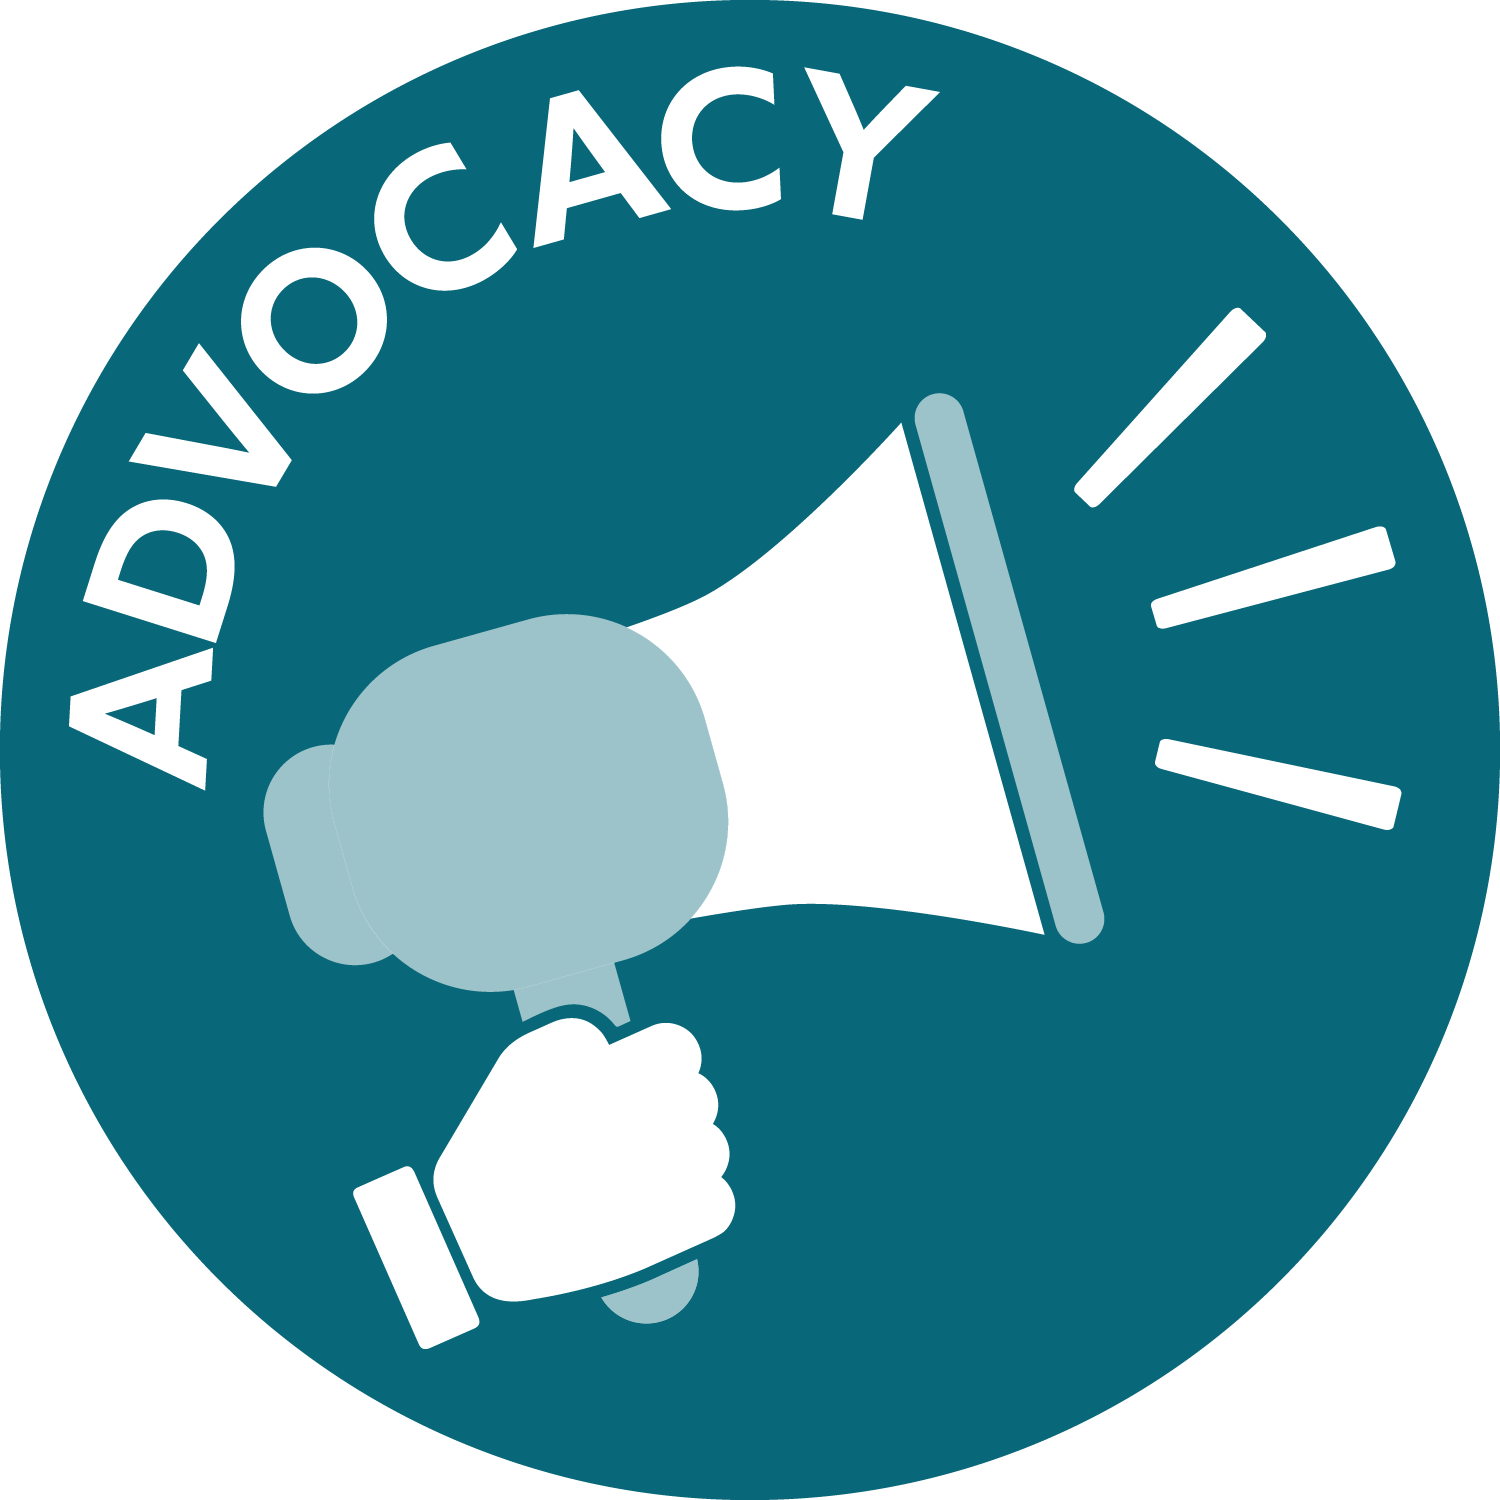 Advocacy. Icon of a hand holding a megaphone